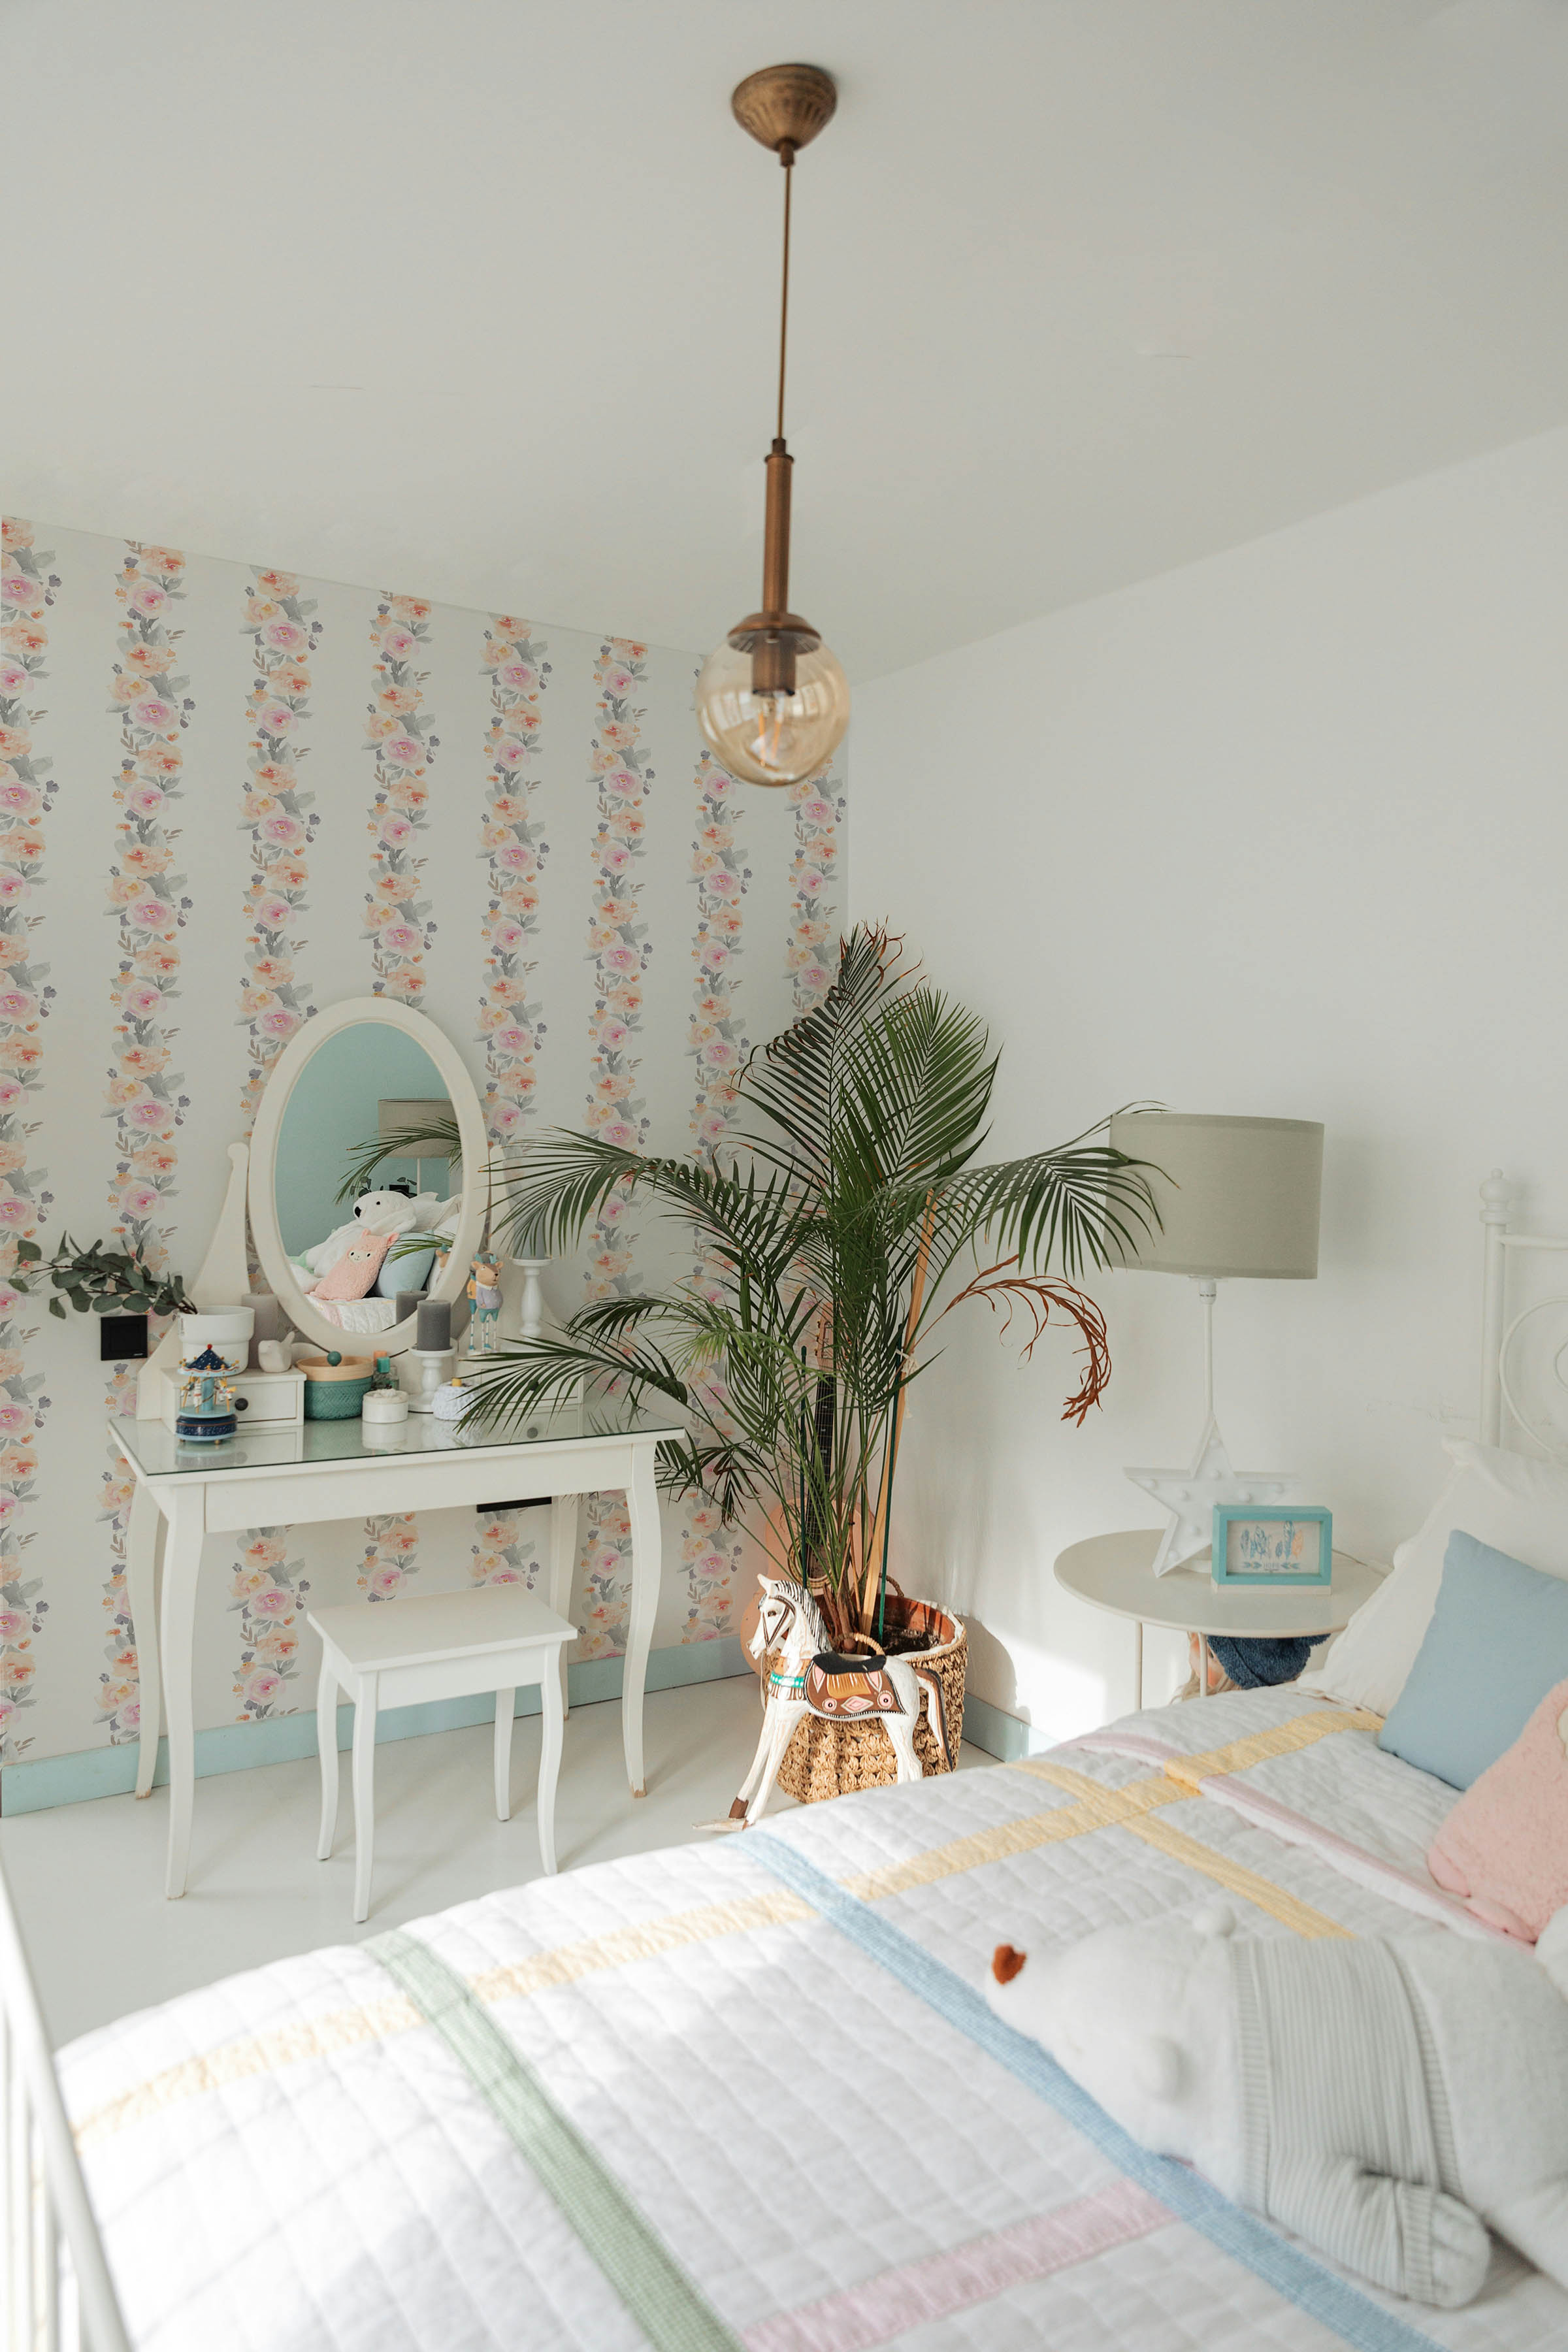 A light and airy bedroom showcases Pastel Dreams Wallpaper adorned with delicate watercolor flowers in shades of pink, peach, and lavender. The room features a bright yellow couch, a white dressing table with a mirror, and a vibrant plant adding a touch of greenery, creating a cheerful and welcoming space.